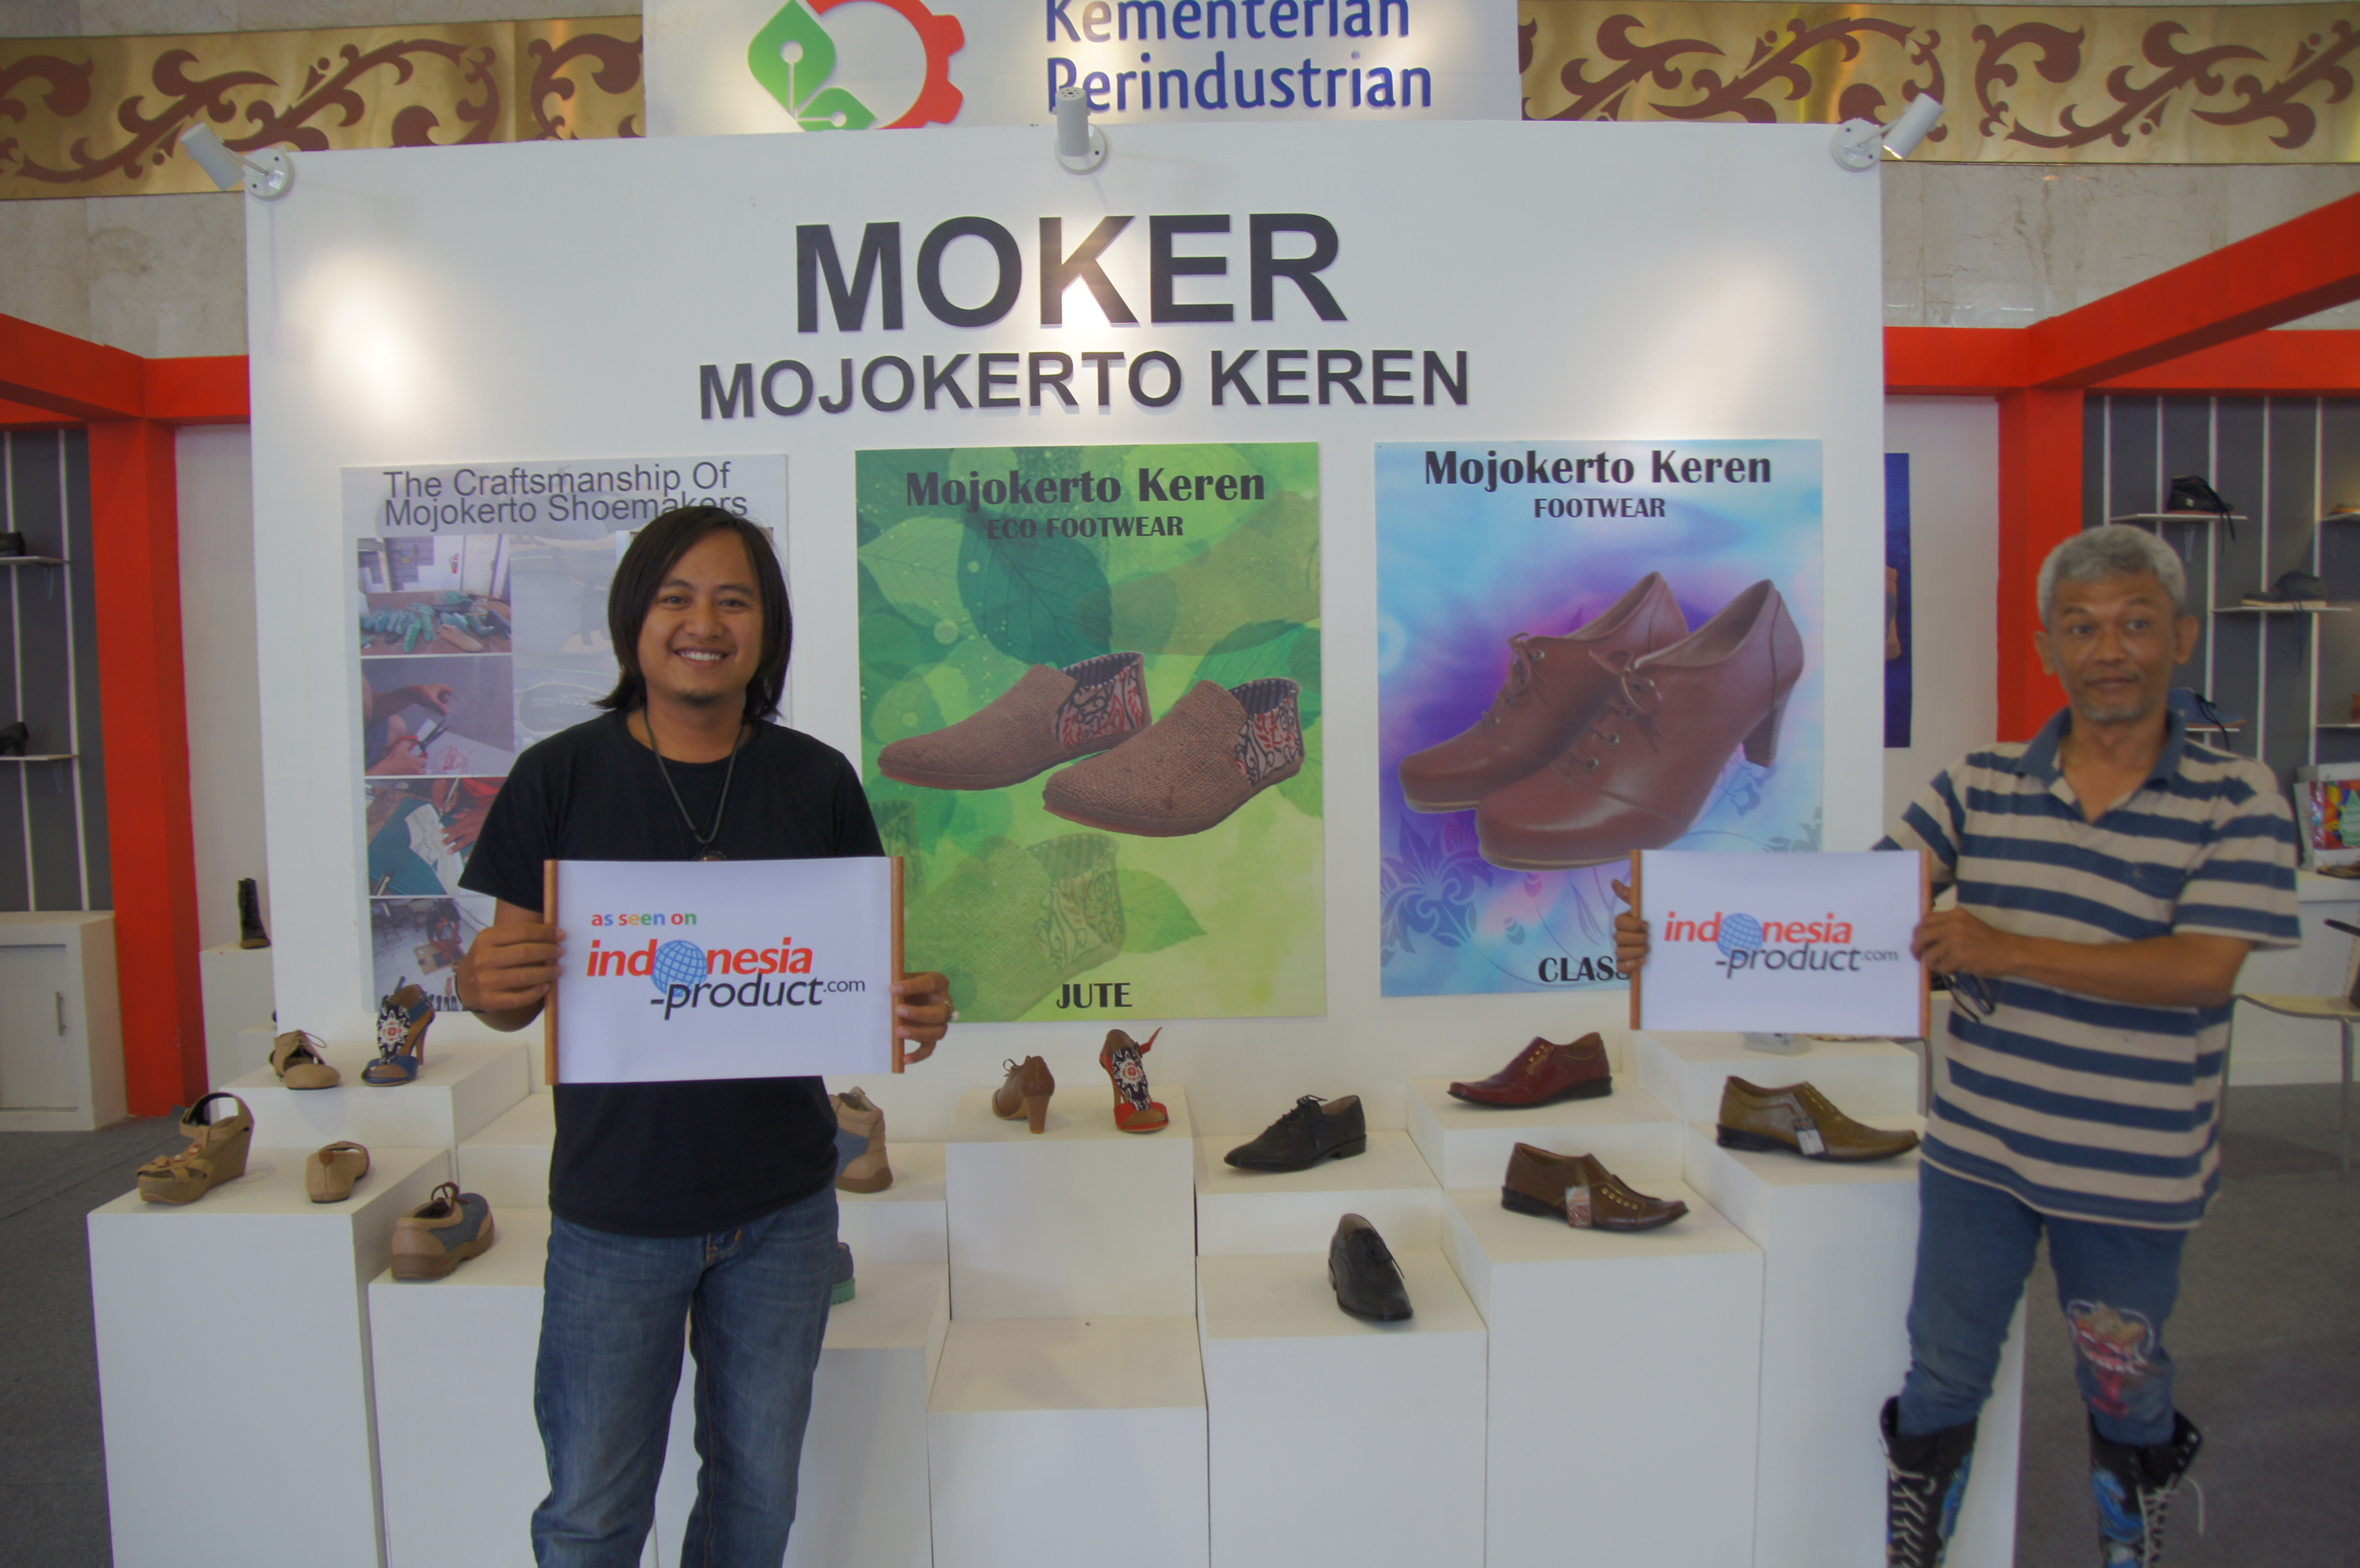 Moker is a brand from Mojokerto that creates homemade shoes